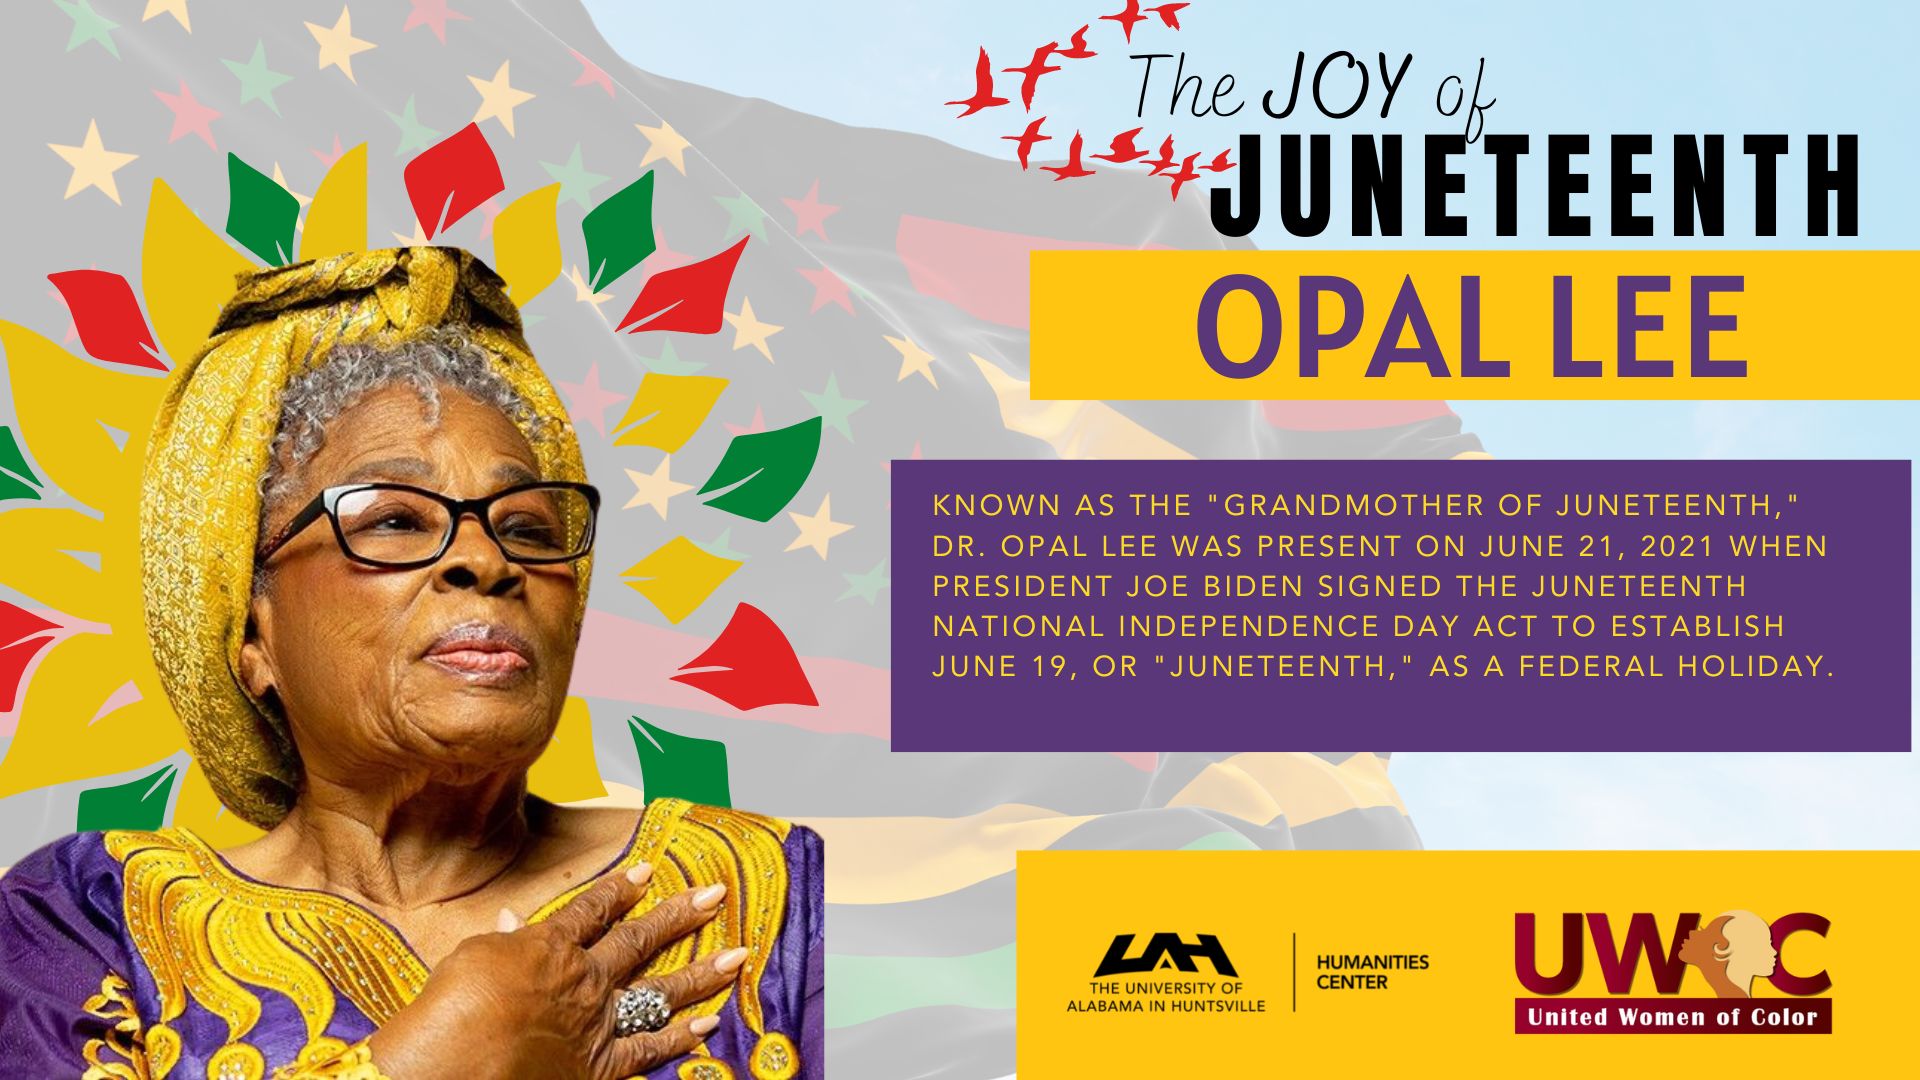 UAH to host The Joy of Juneteenth with Dr. Opal Lee August 28 & 29, 2022